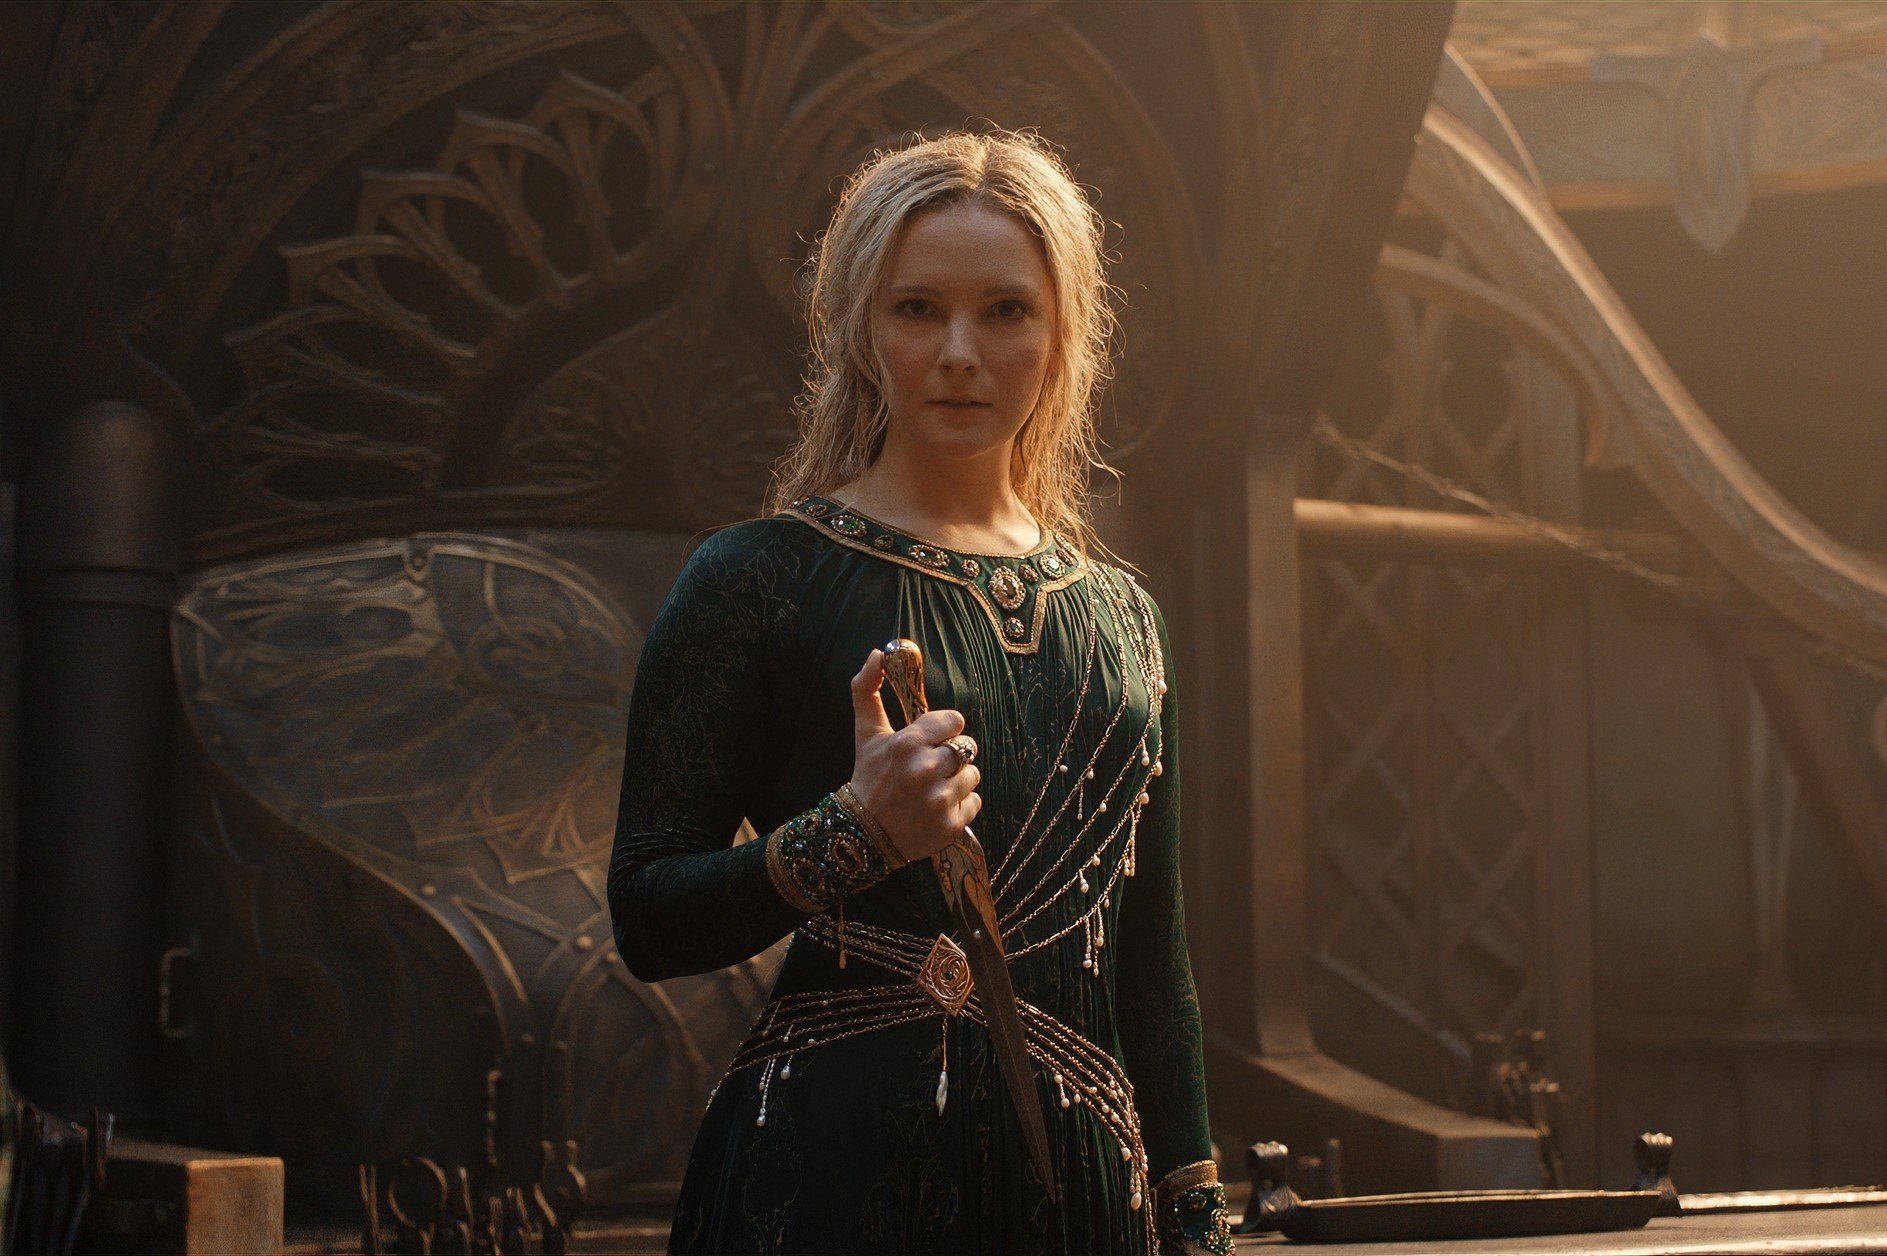 Morfydd Clark as Galadriel in 'The Rings of Power' Episode 8 for our article about its Easter Eggs. She's holding a blade and looks cautious.